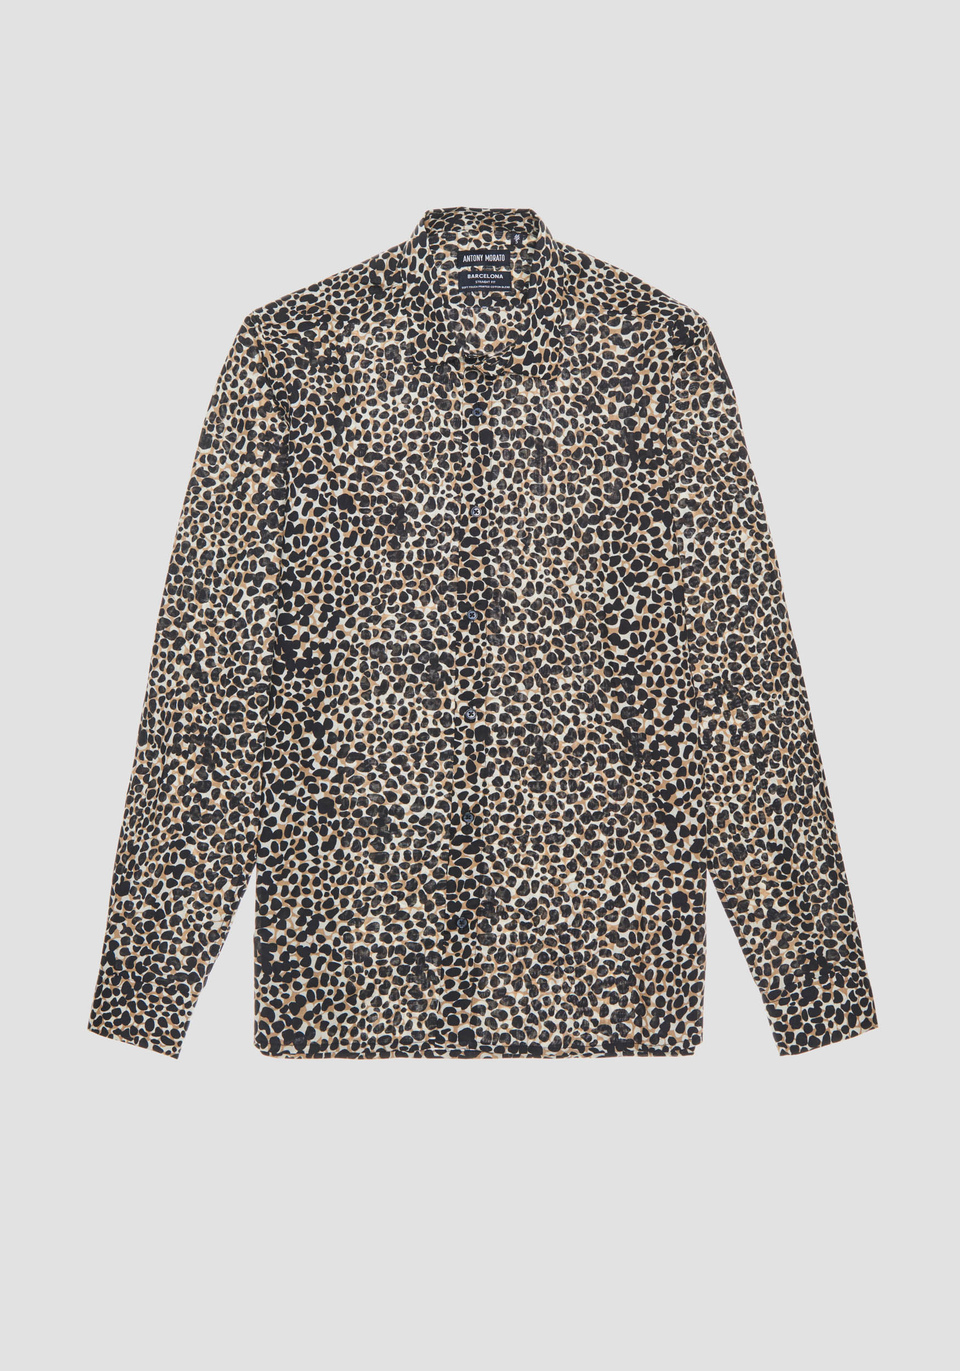 STRAIGHT-FIT SHIRT IN PURE COTTON WITH ANIMAL PRINT - Antony Morato Online Shop